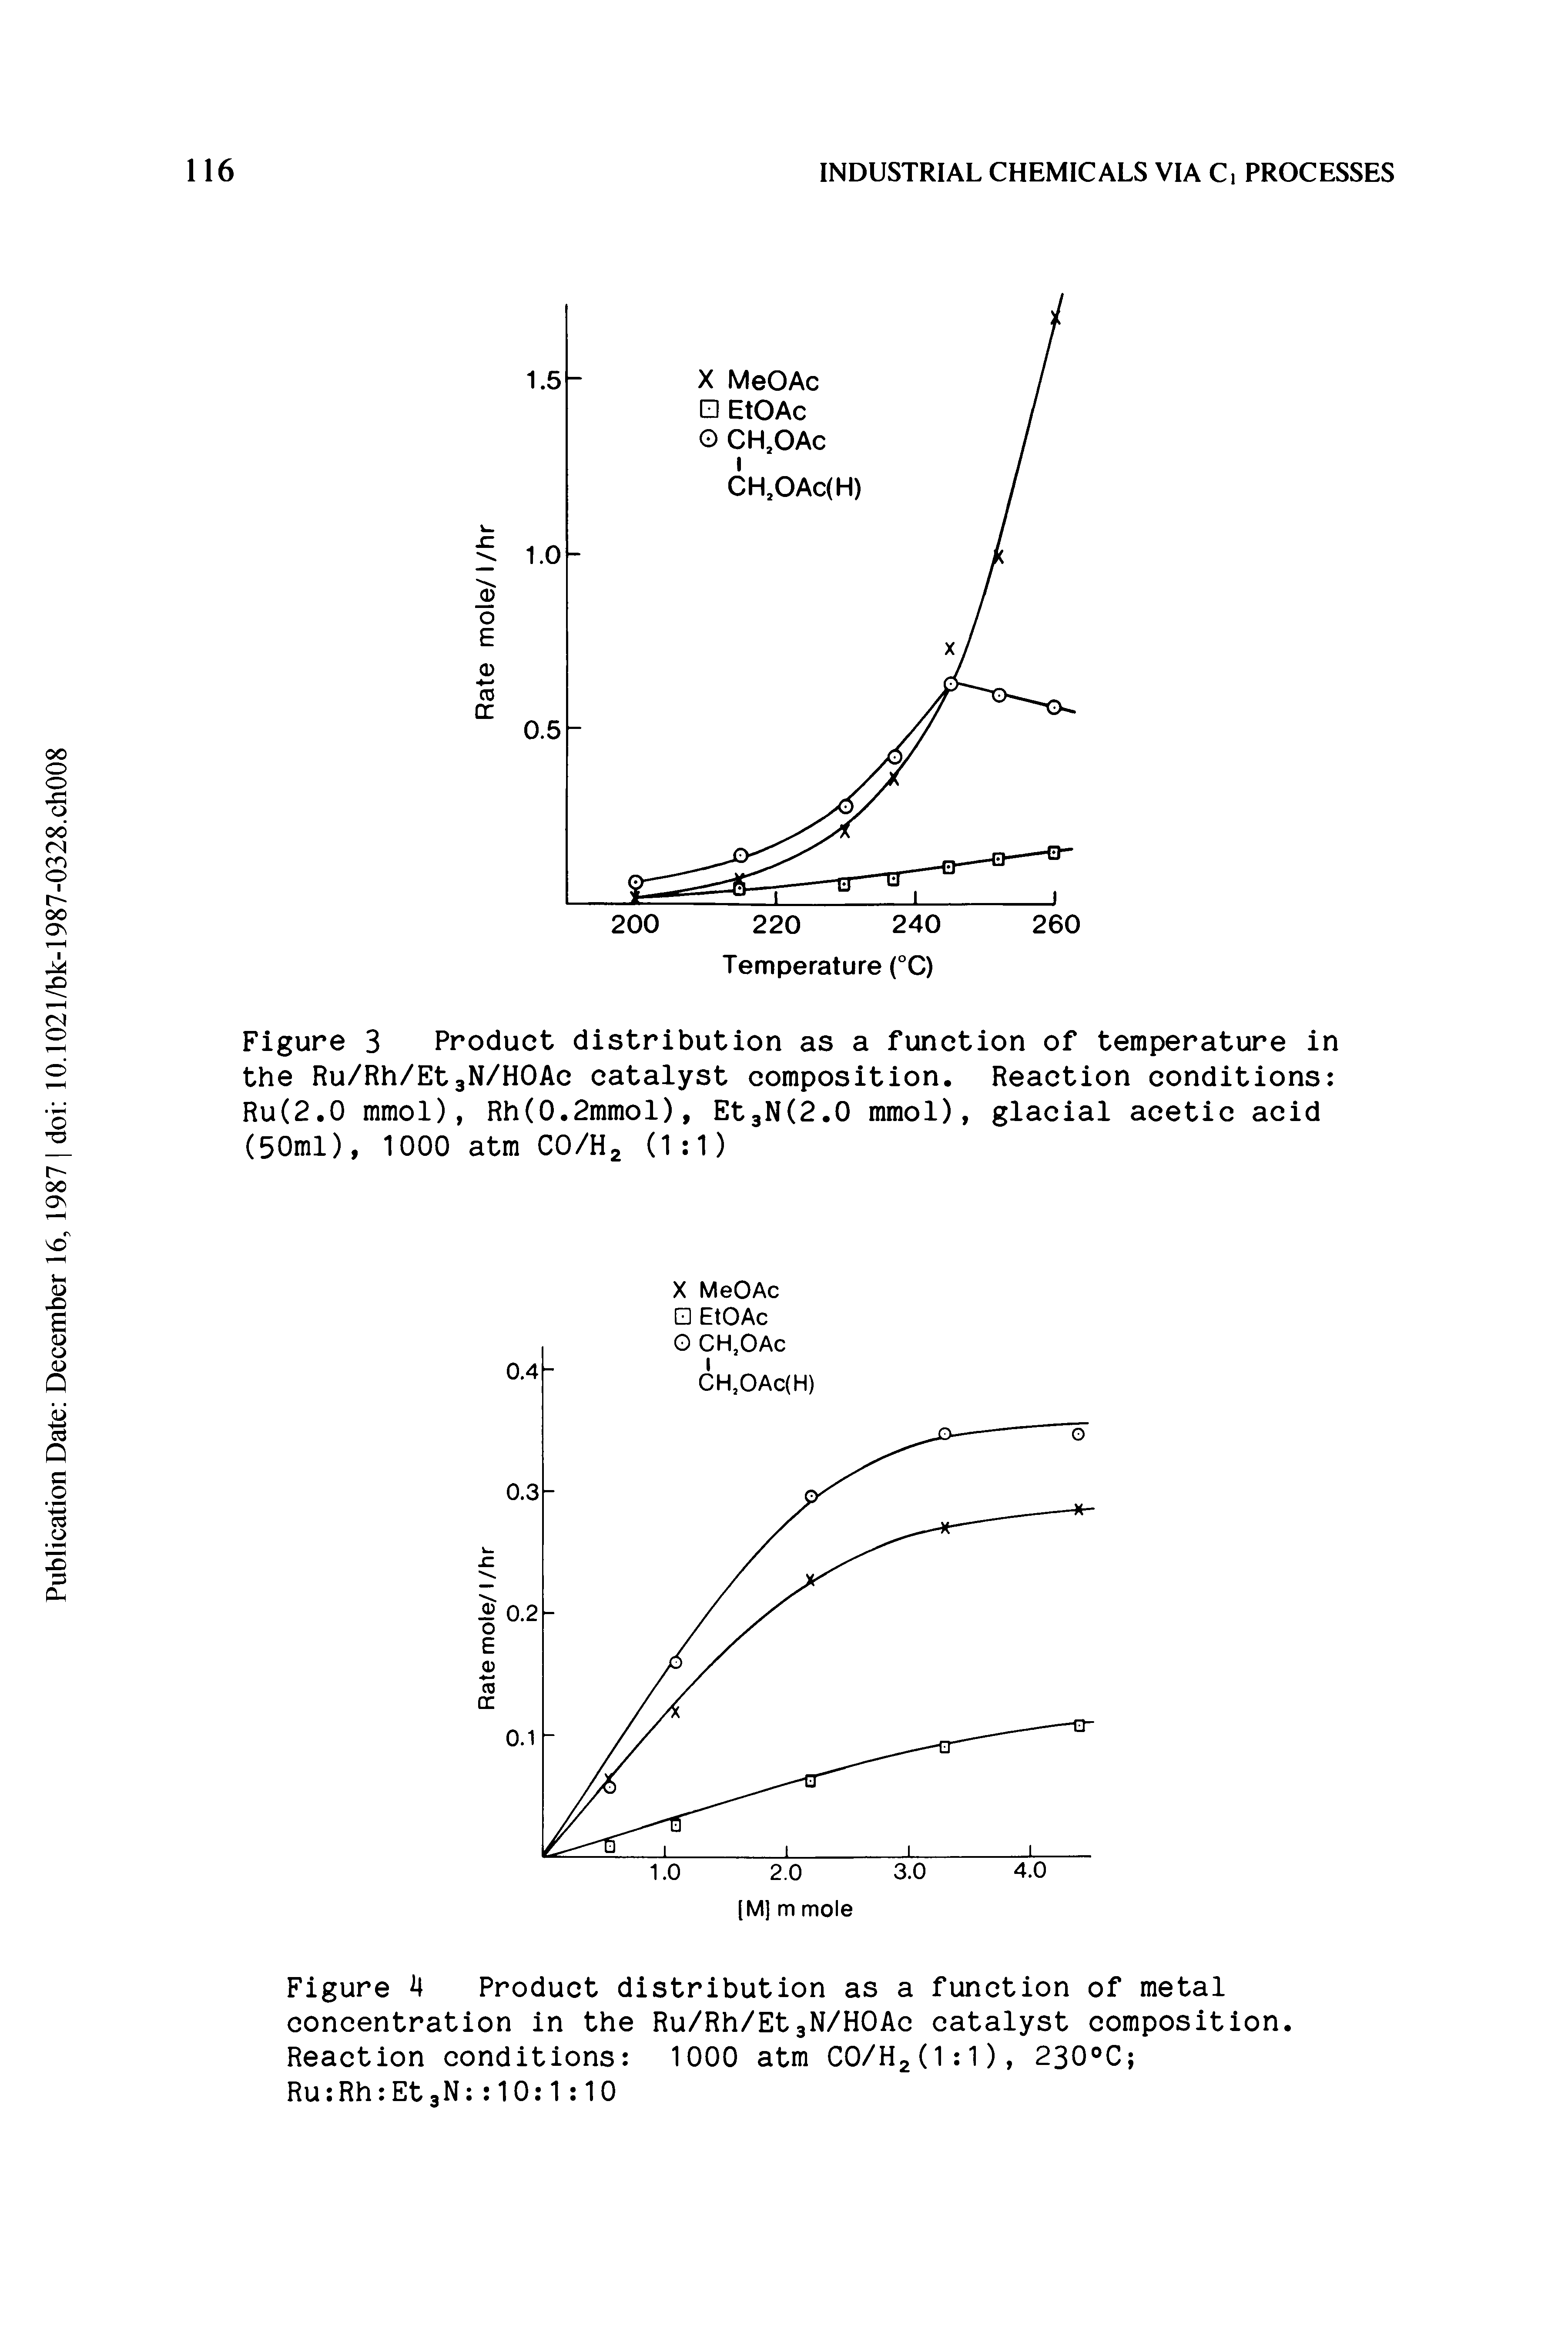 Figure Product distribution as a function of metal concentration in the Ru/Rh/Et3N/HOAC catalyst composition. Reaction conditions 1000 atm C0/H2(1 1), 230°C Ru Rh Et3N 10 1 10...